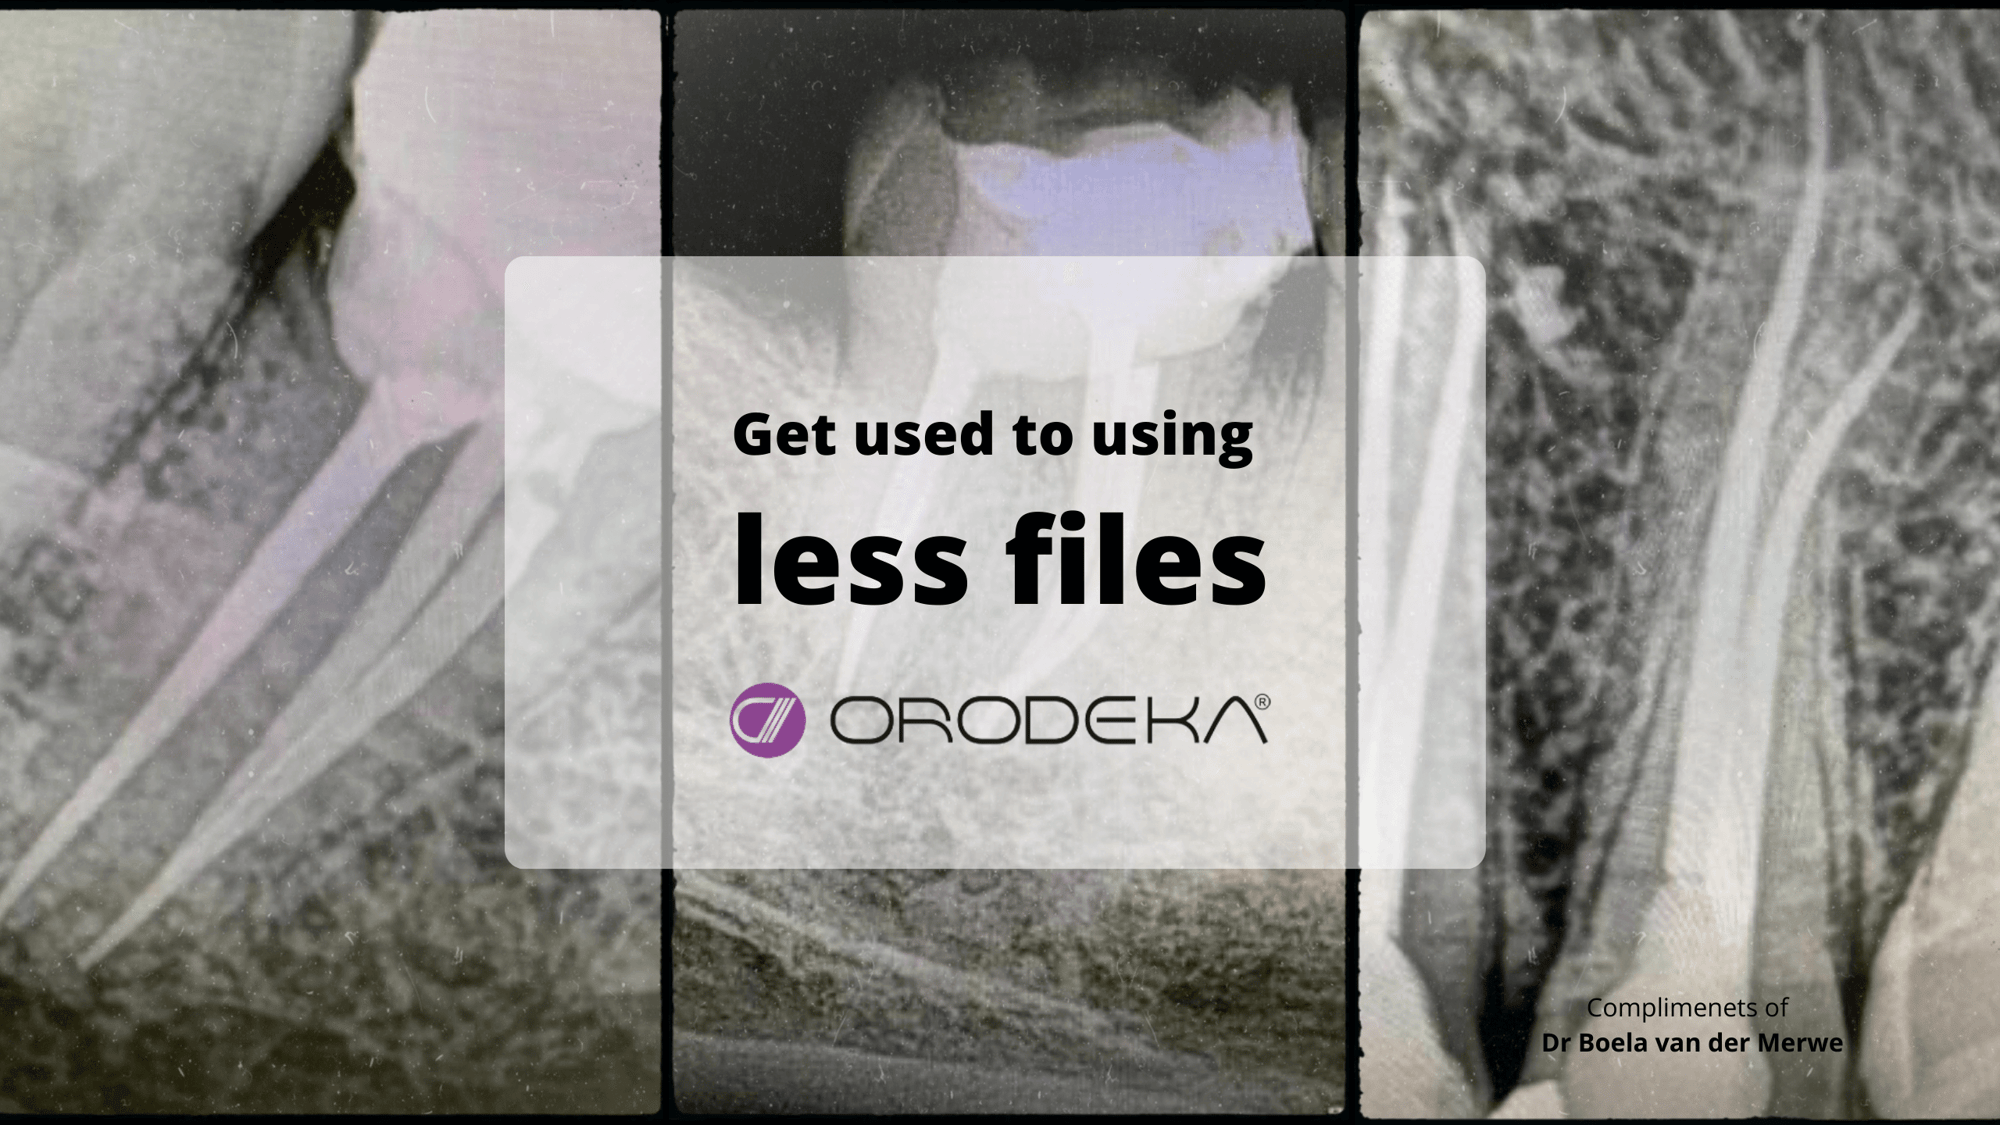  Orodeka get used to using less files web